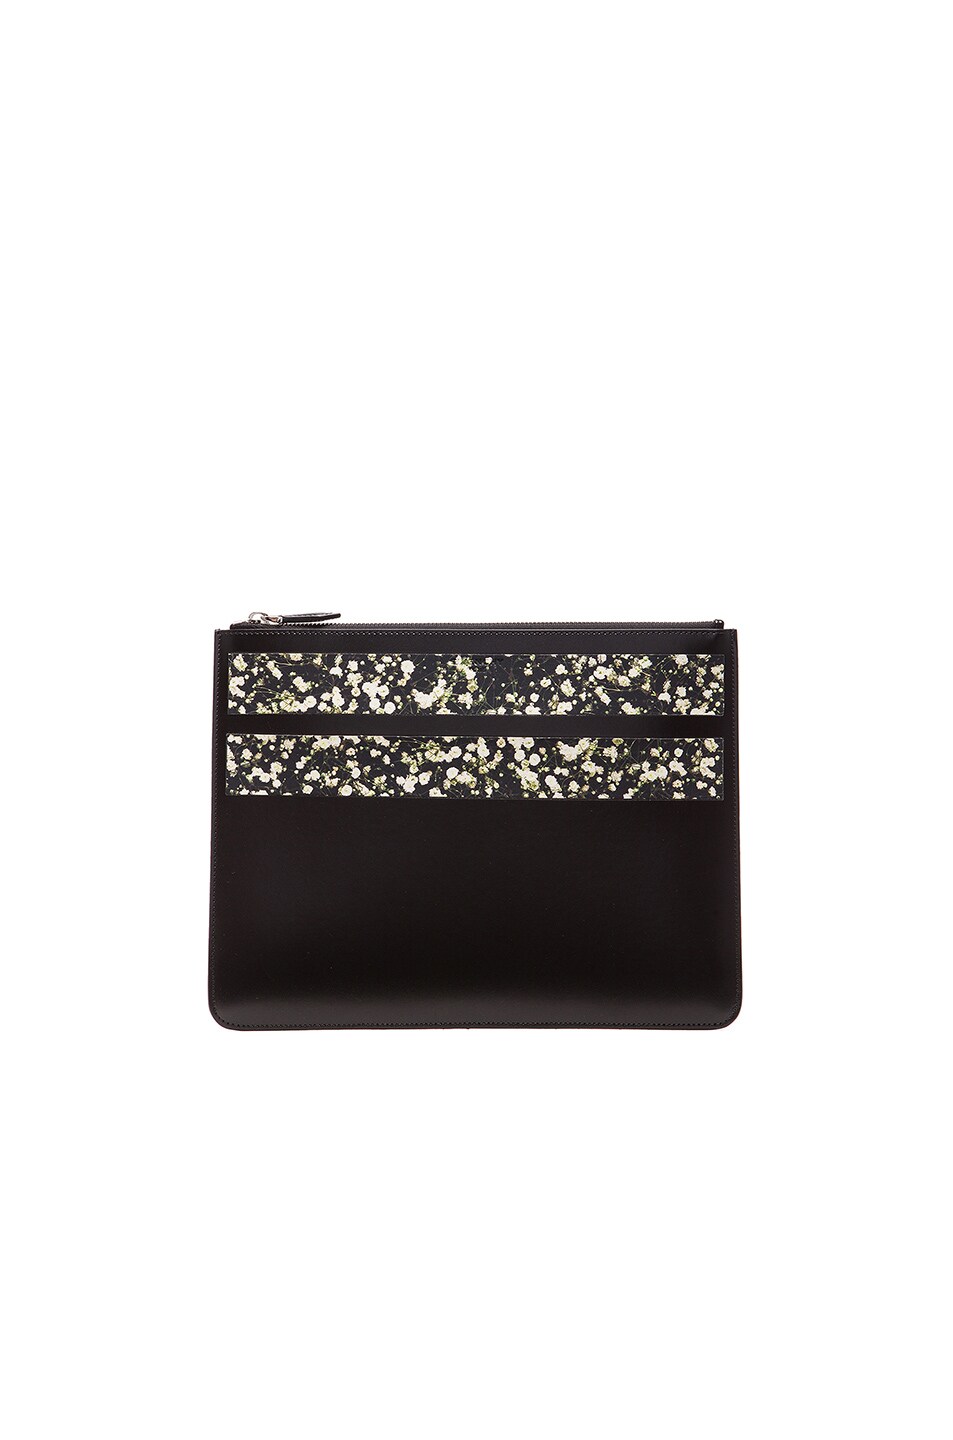 Image 1 of Givenchy Large Pouch with Floral Stripes in Black